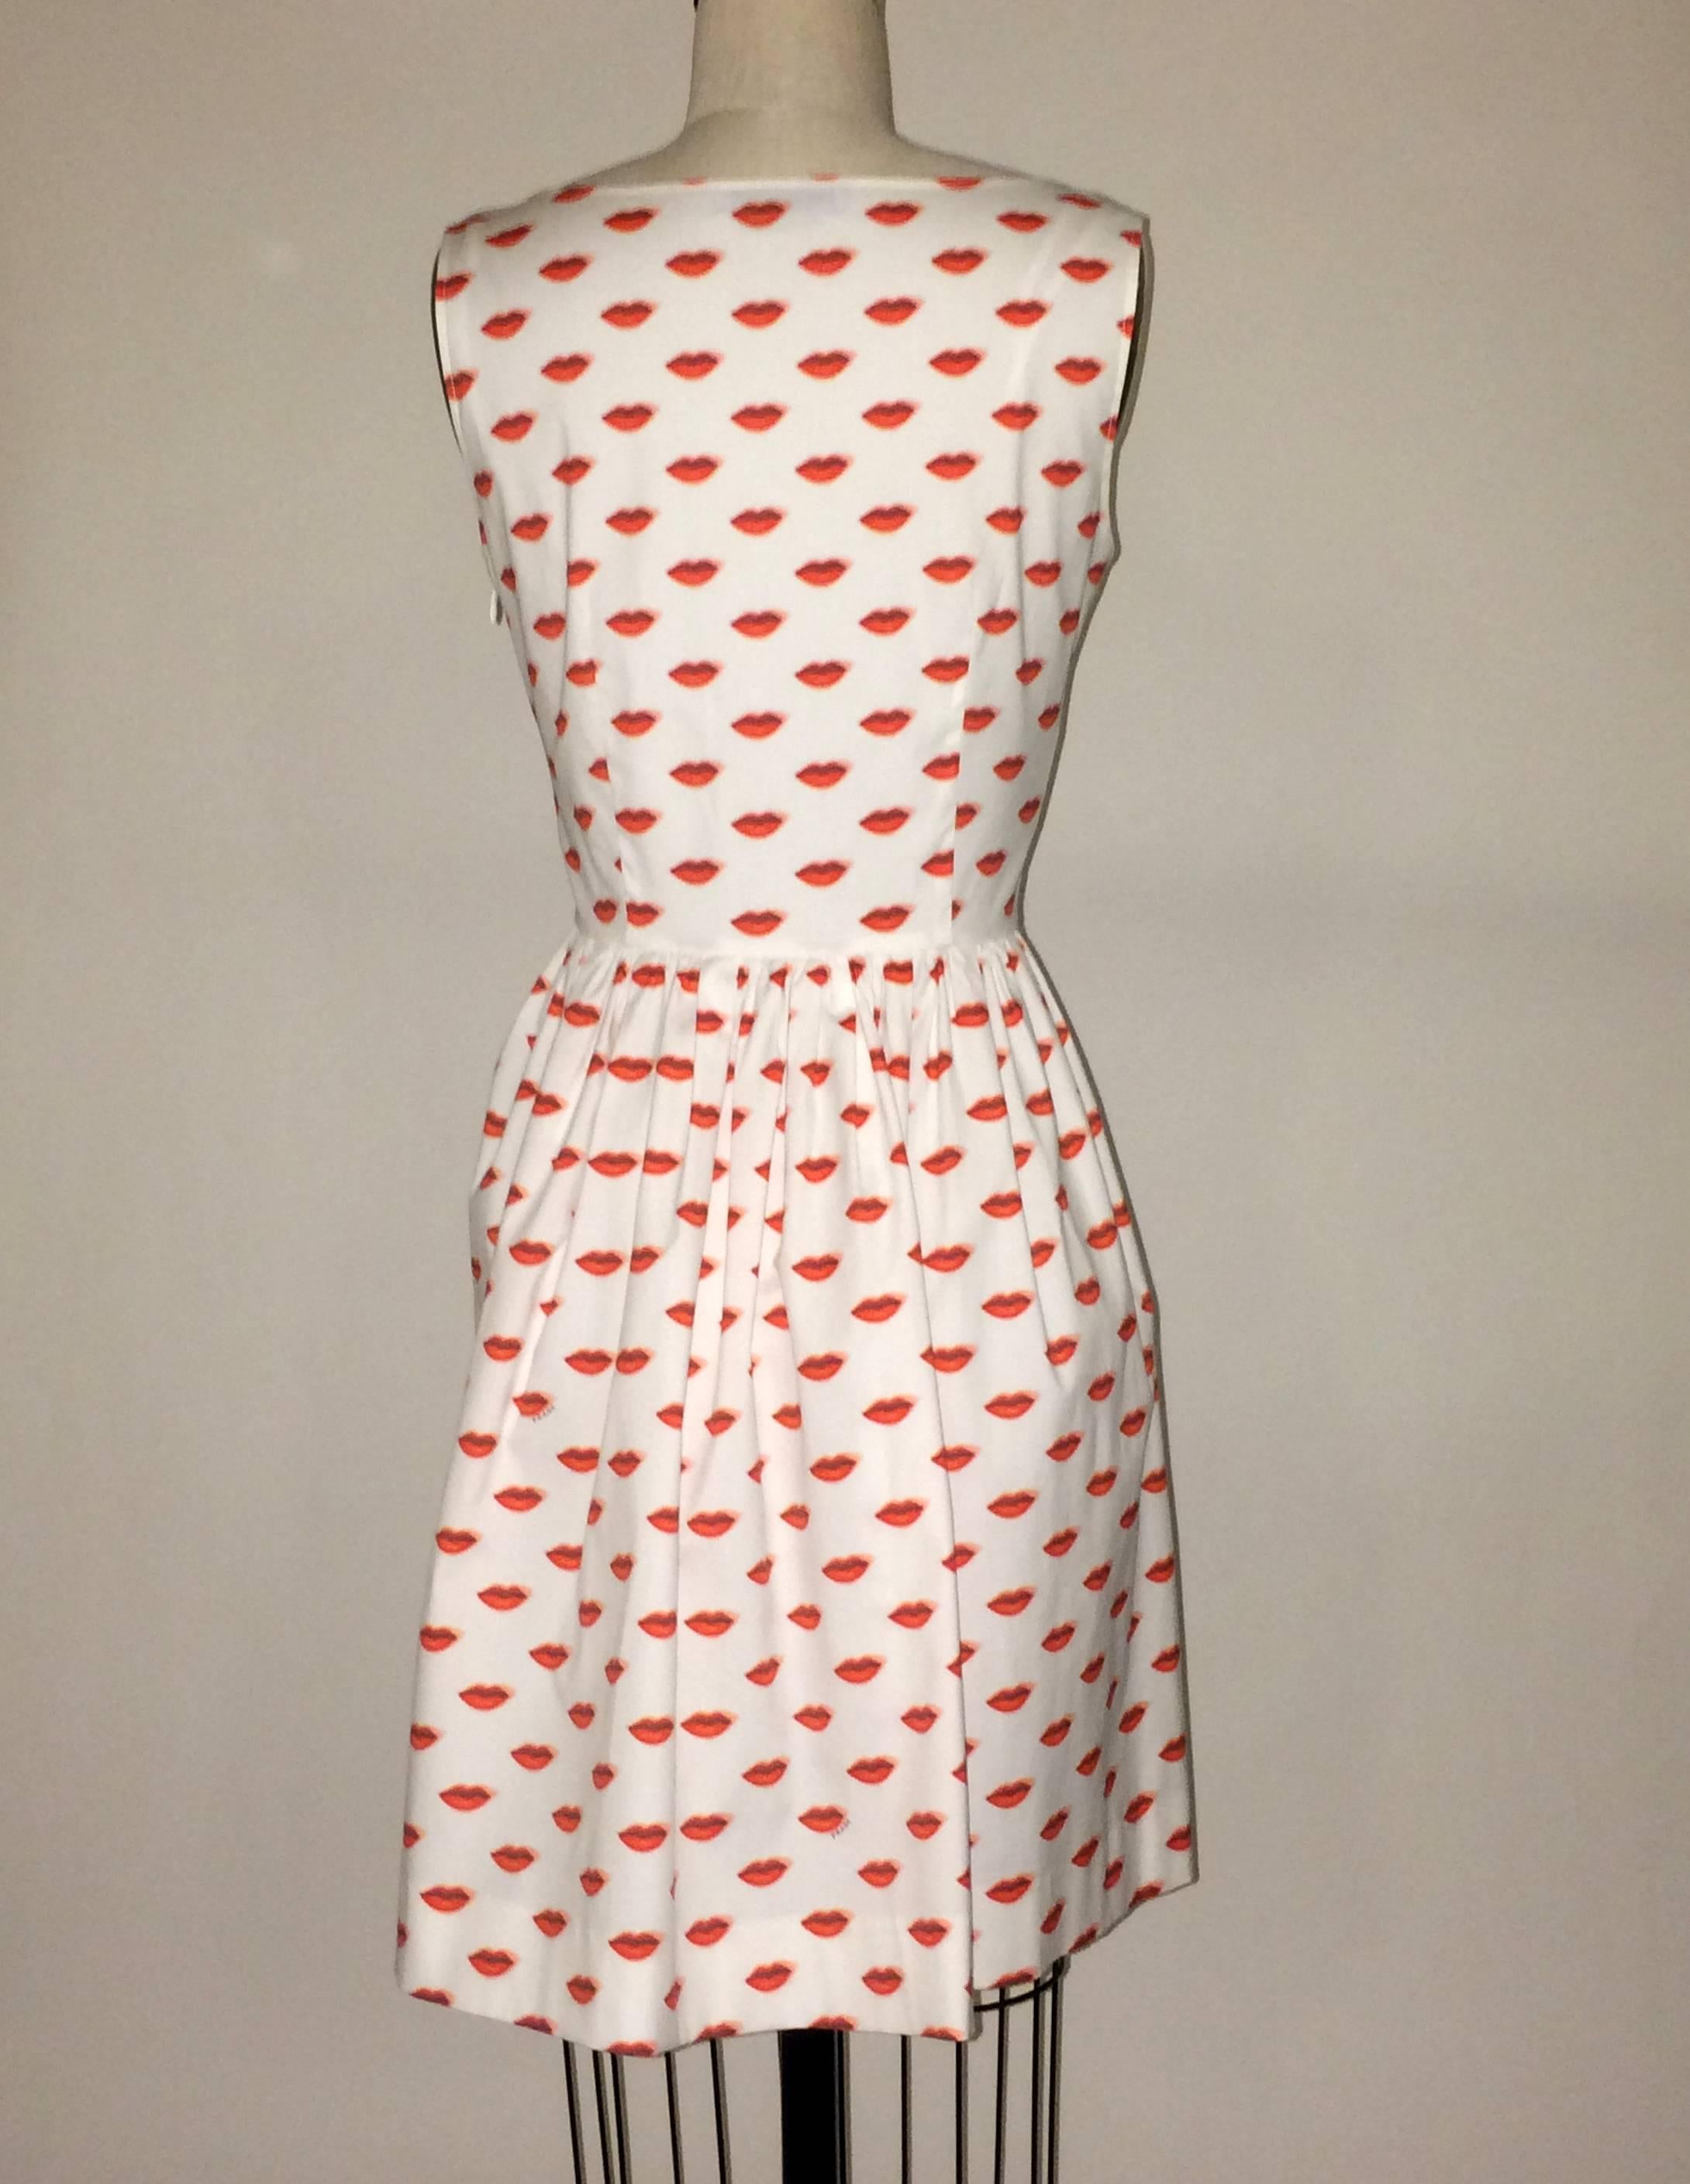 Prada white dress with surrealist red lip print and Prada signature sprinkled throughout. Four working buttons up front bodice. Side zip and hook and eye.

96% cotton, 4% other.

Made in Romania.

Size IT 42, approximate US 6.
Bust